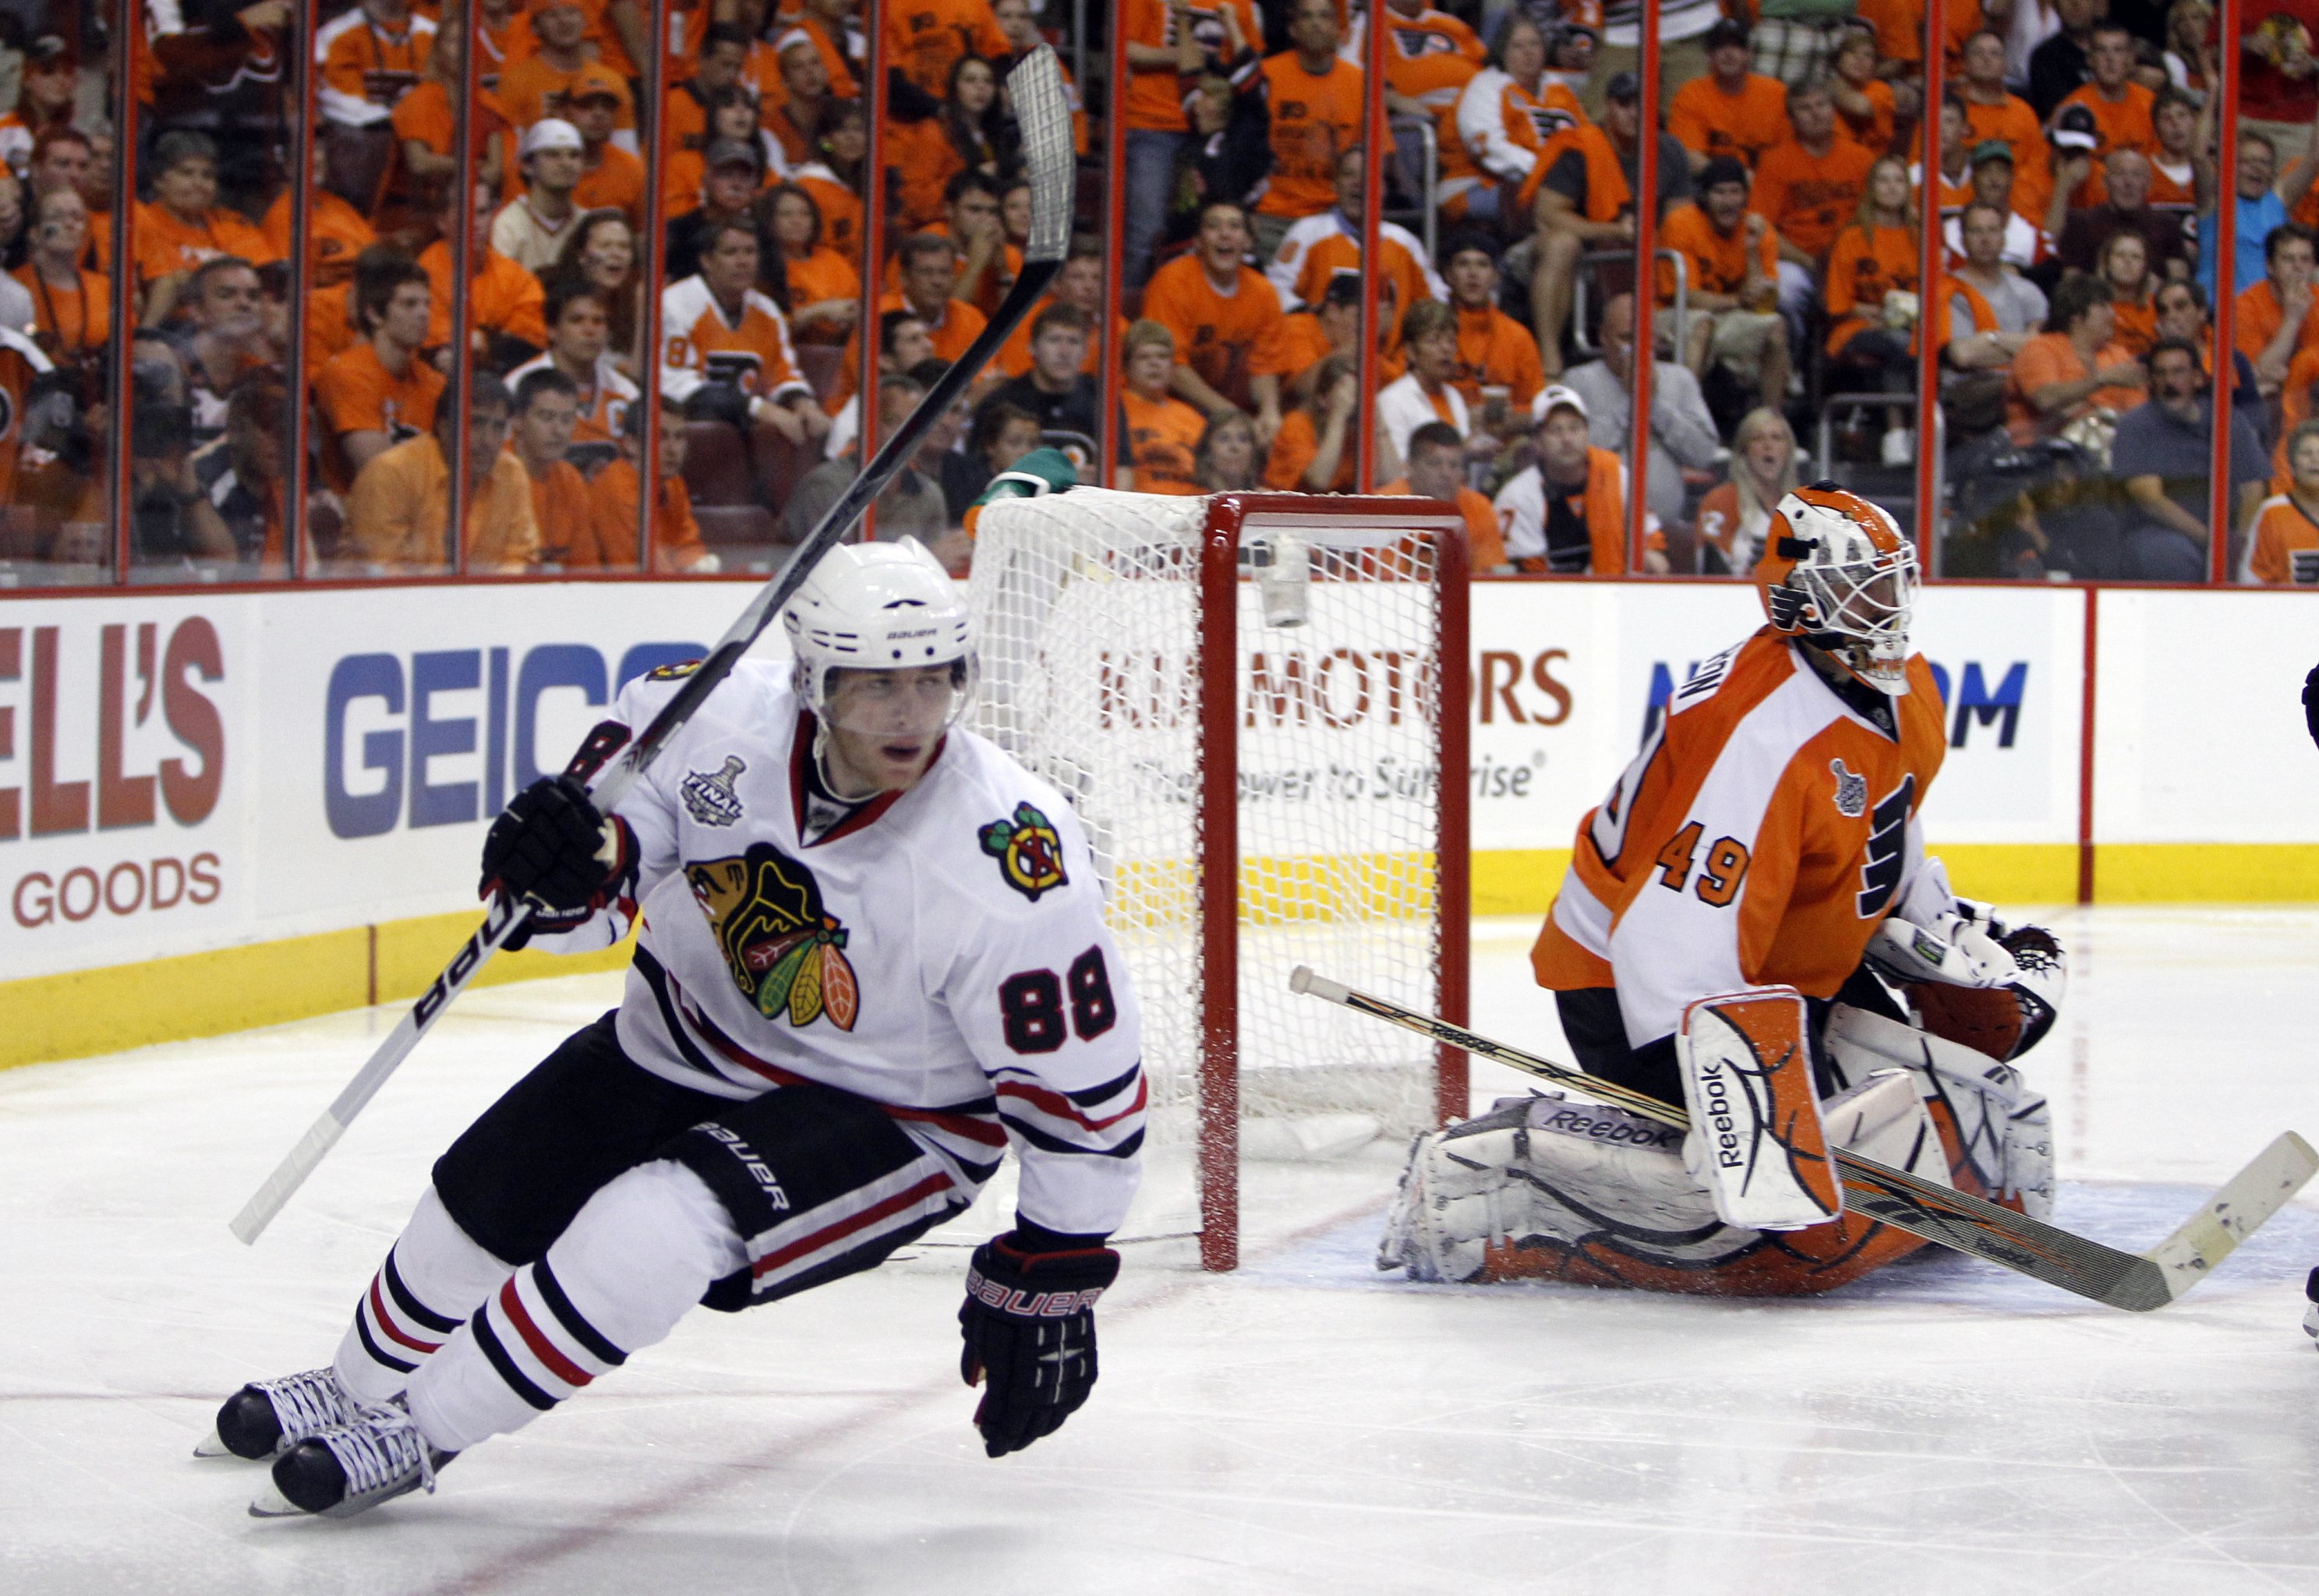 NHL: 6 potential landing spots if Patrick Kane decides to move